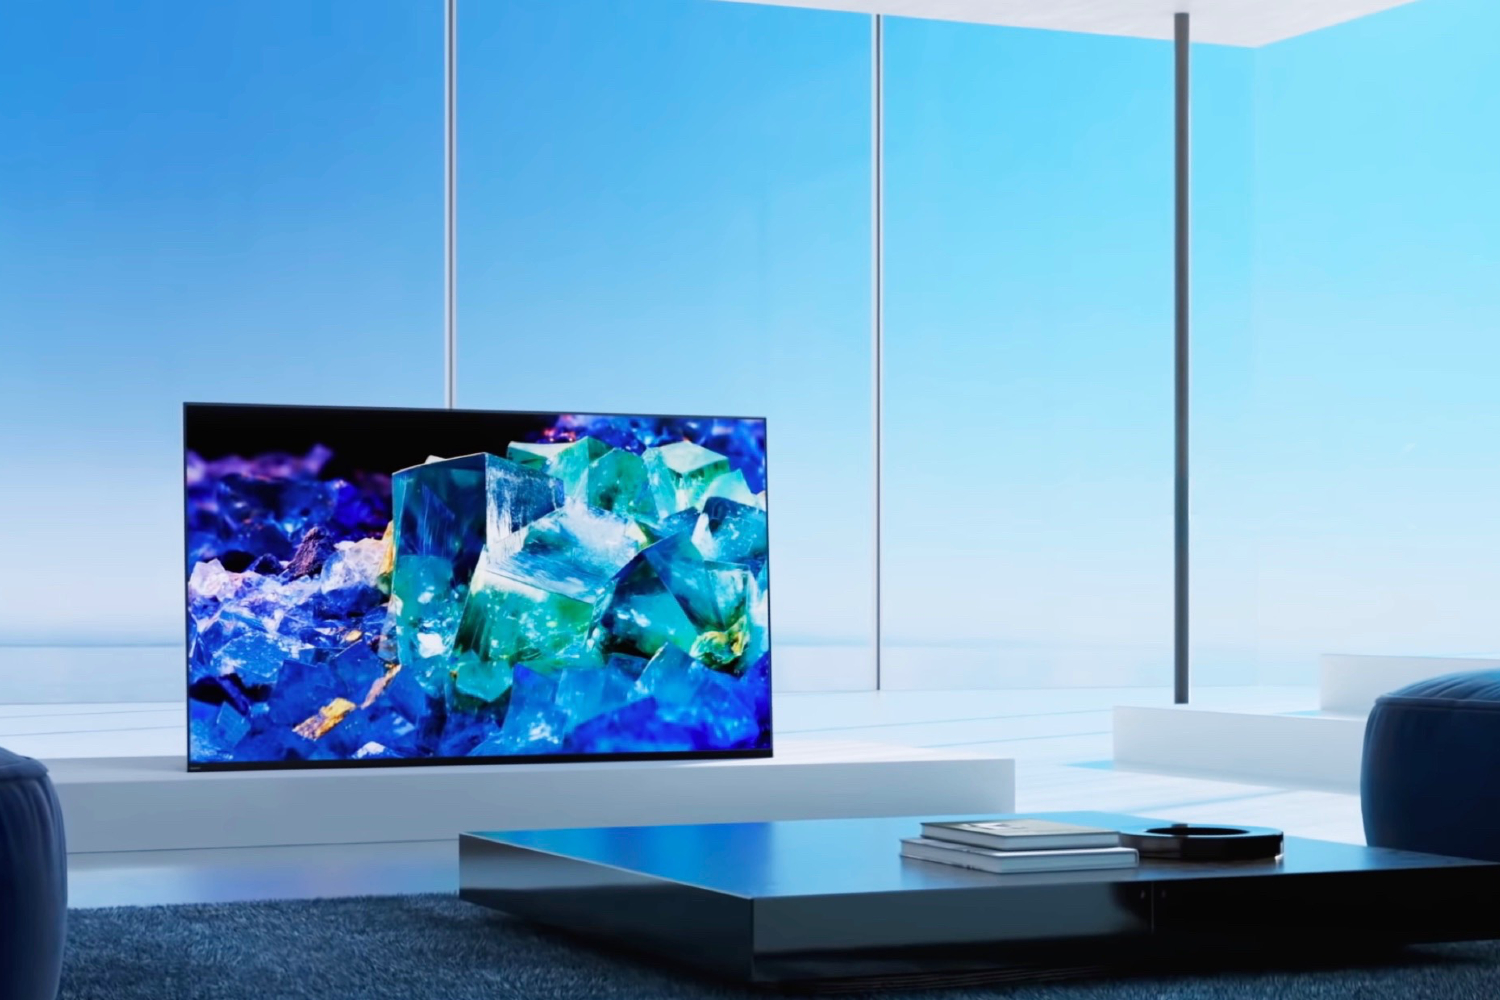 Everything You Need to Know About 4K and HDR Before Buying a TV